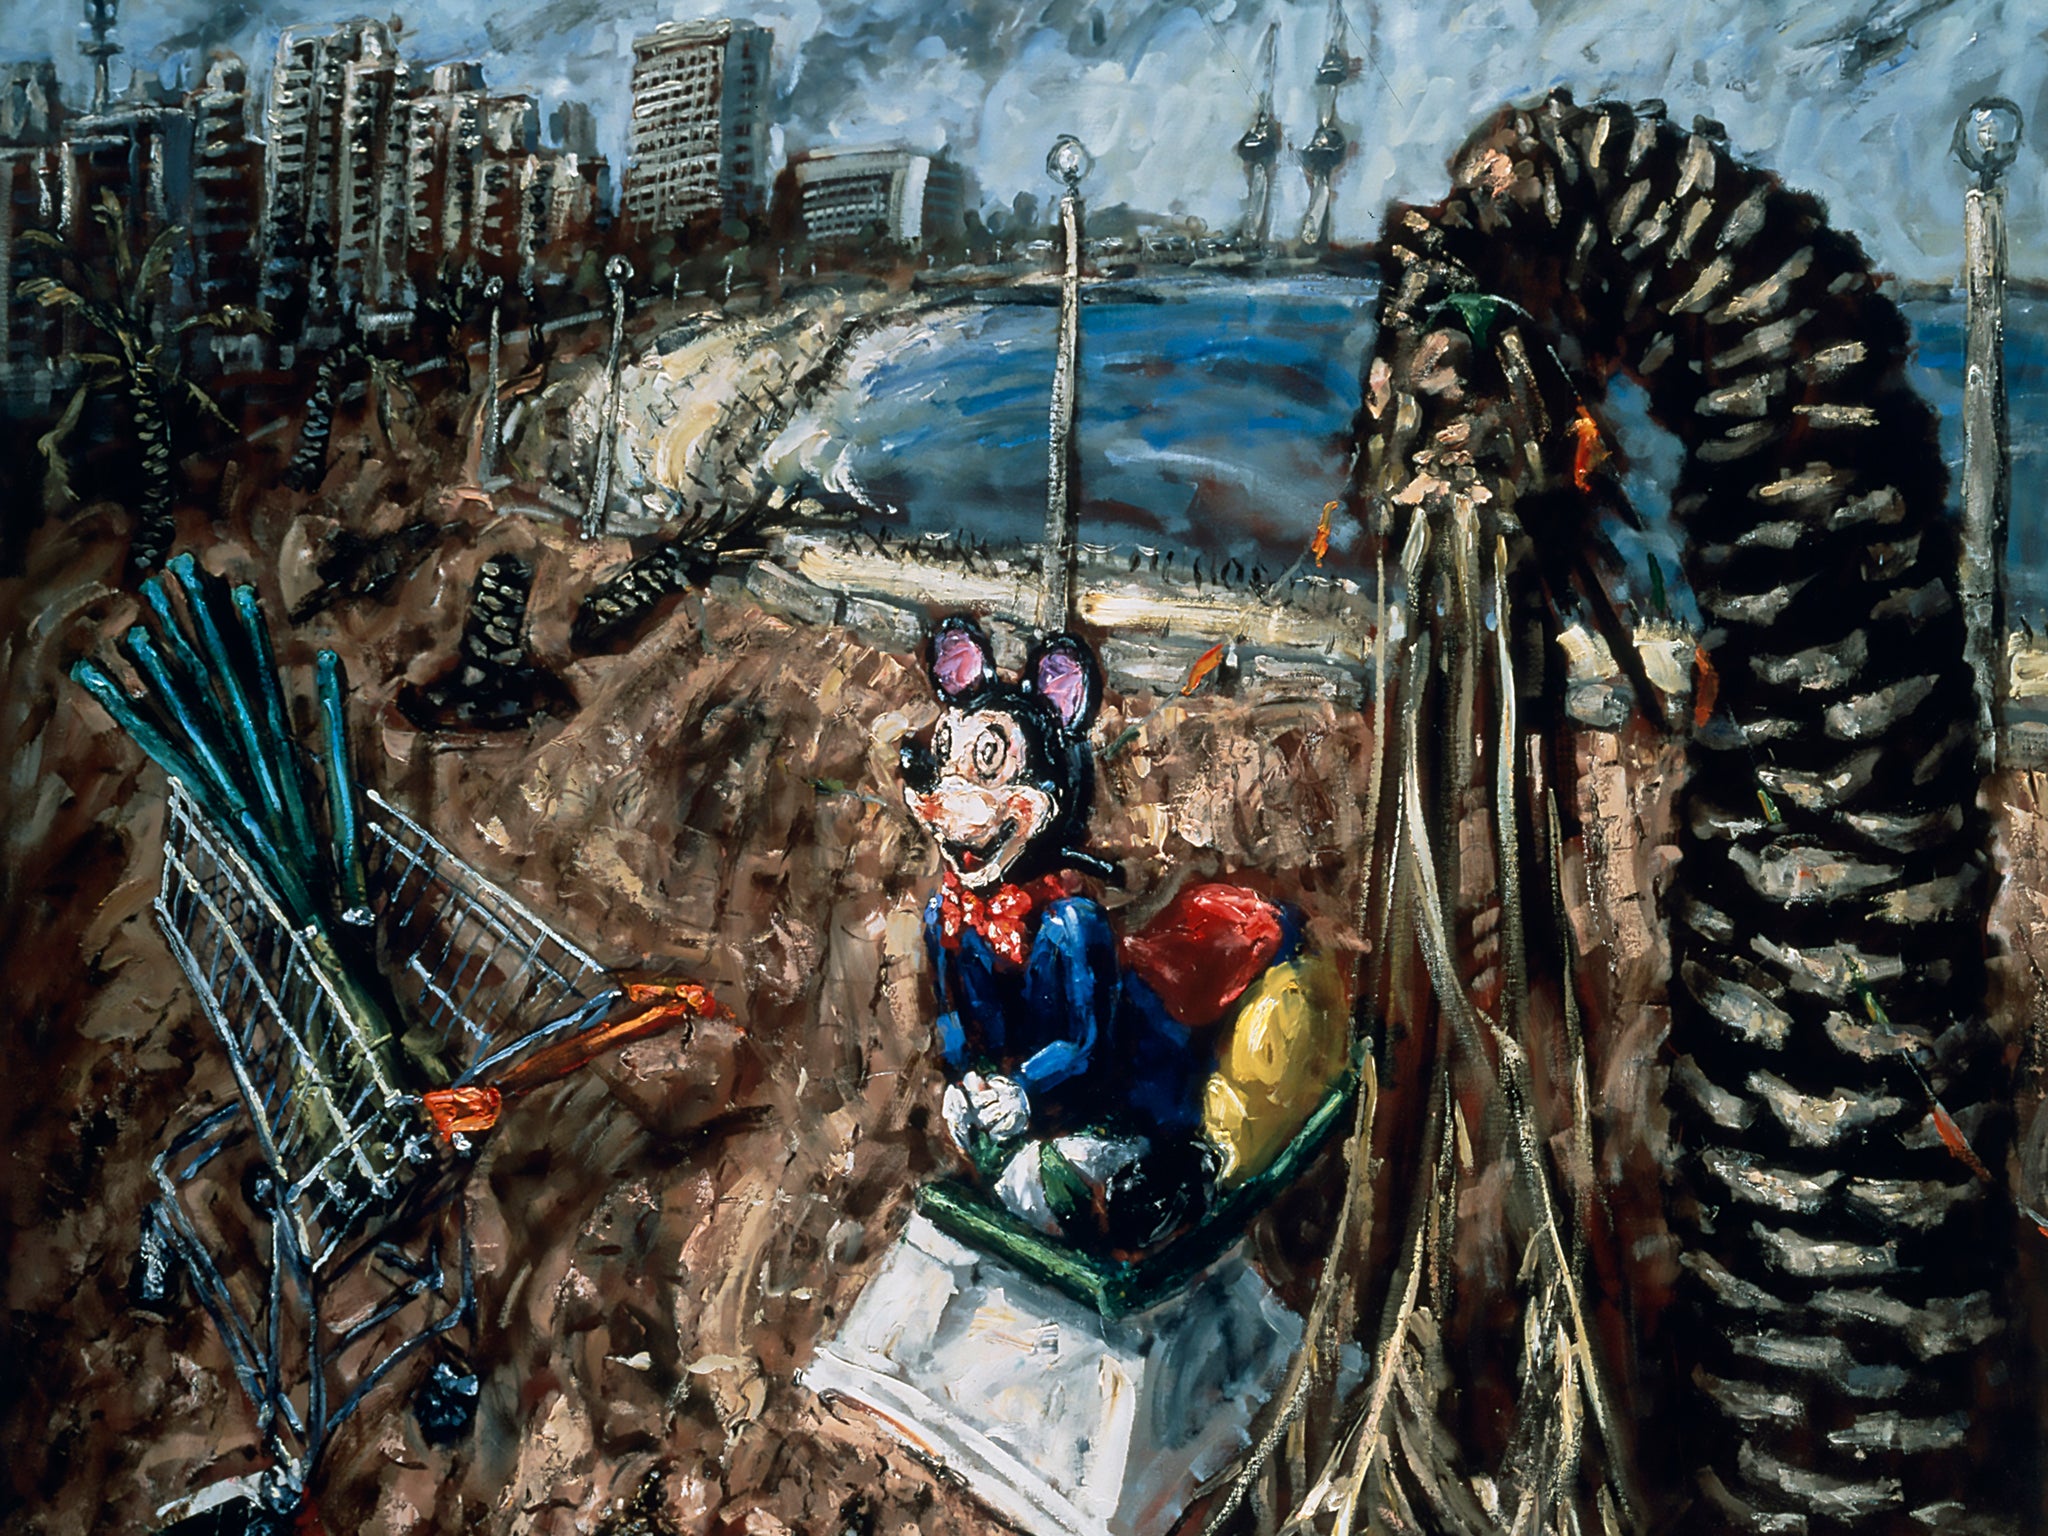 Mickey Mouse at the Front by Gulf War artist John Keane